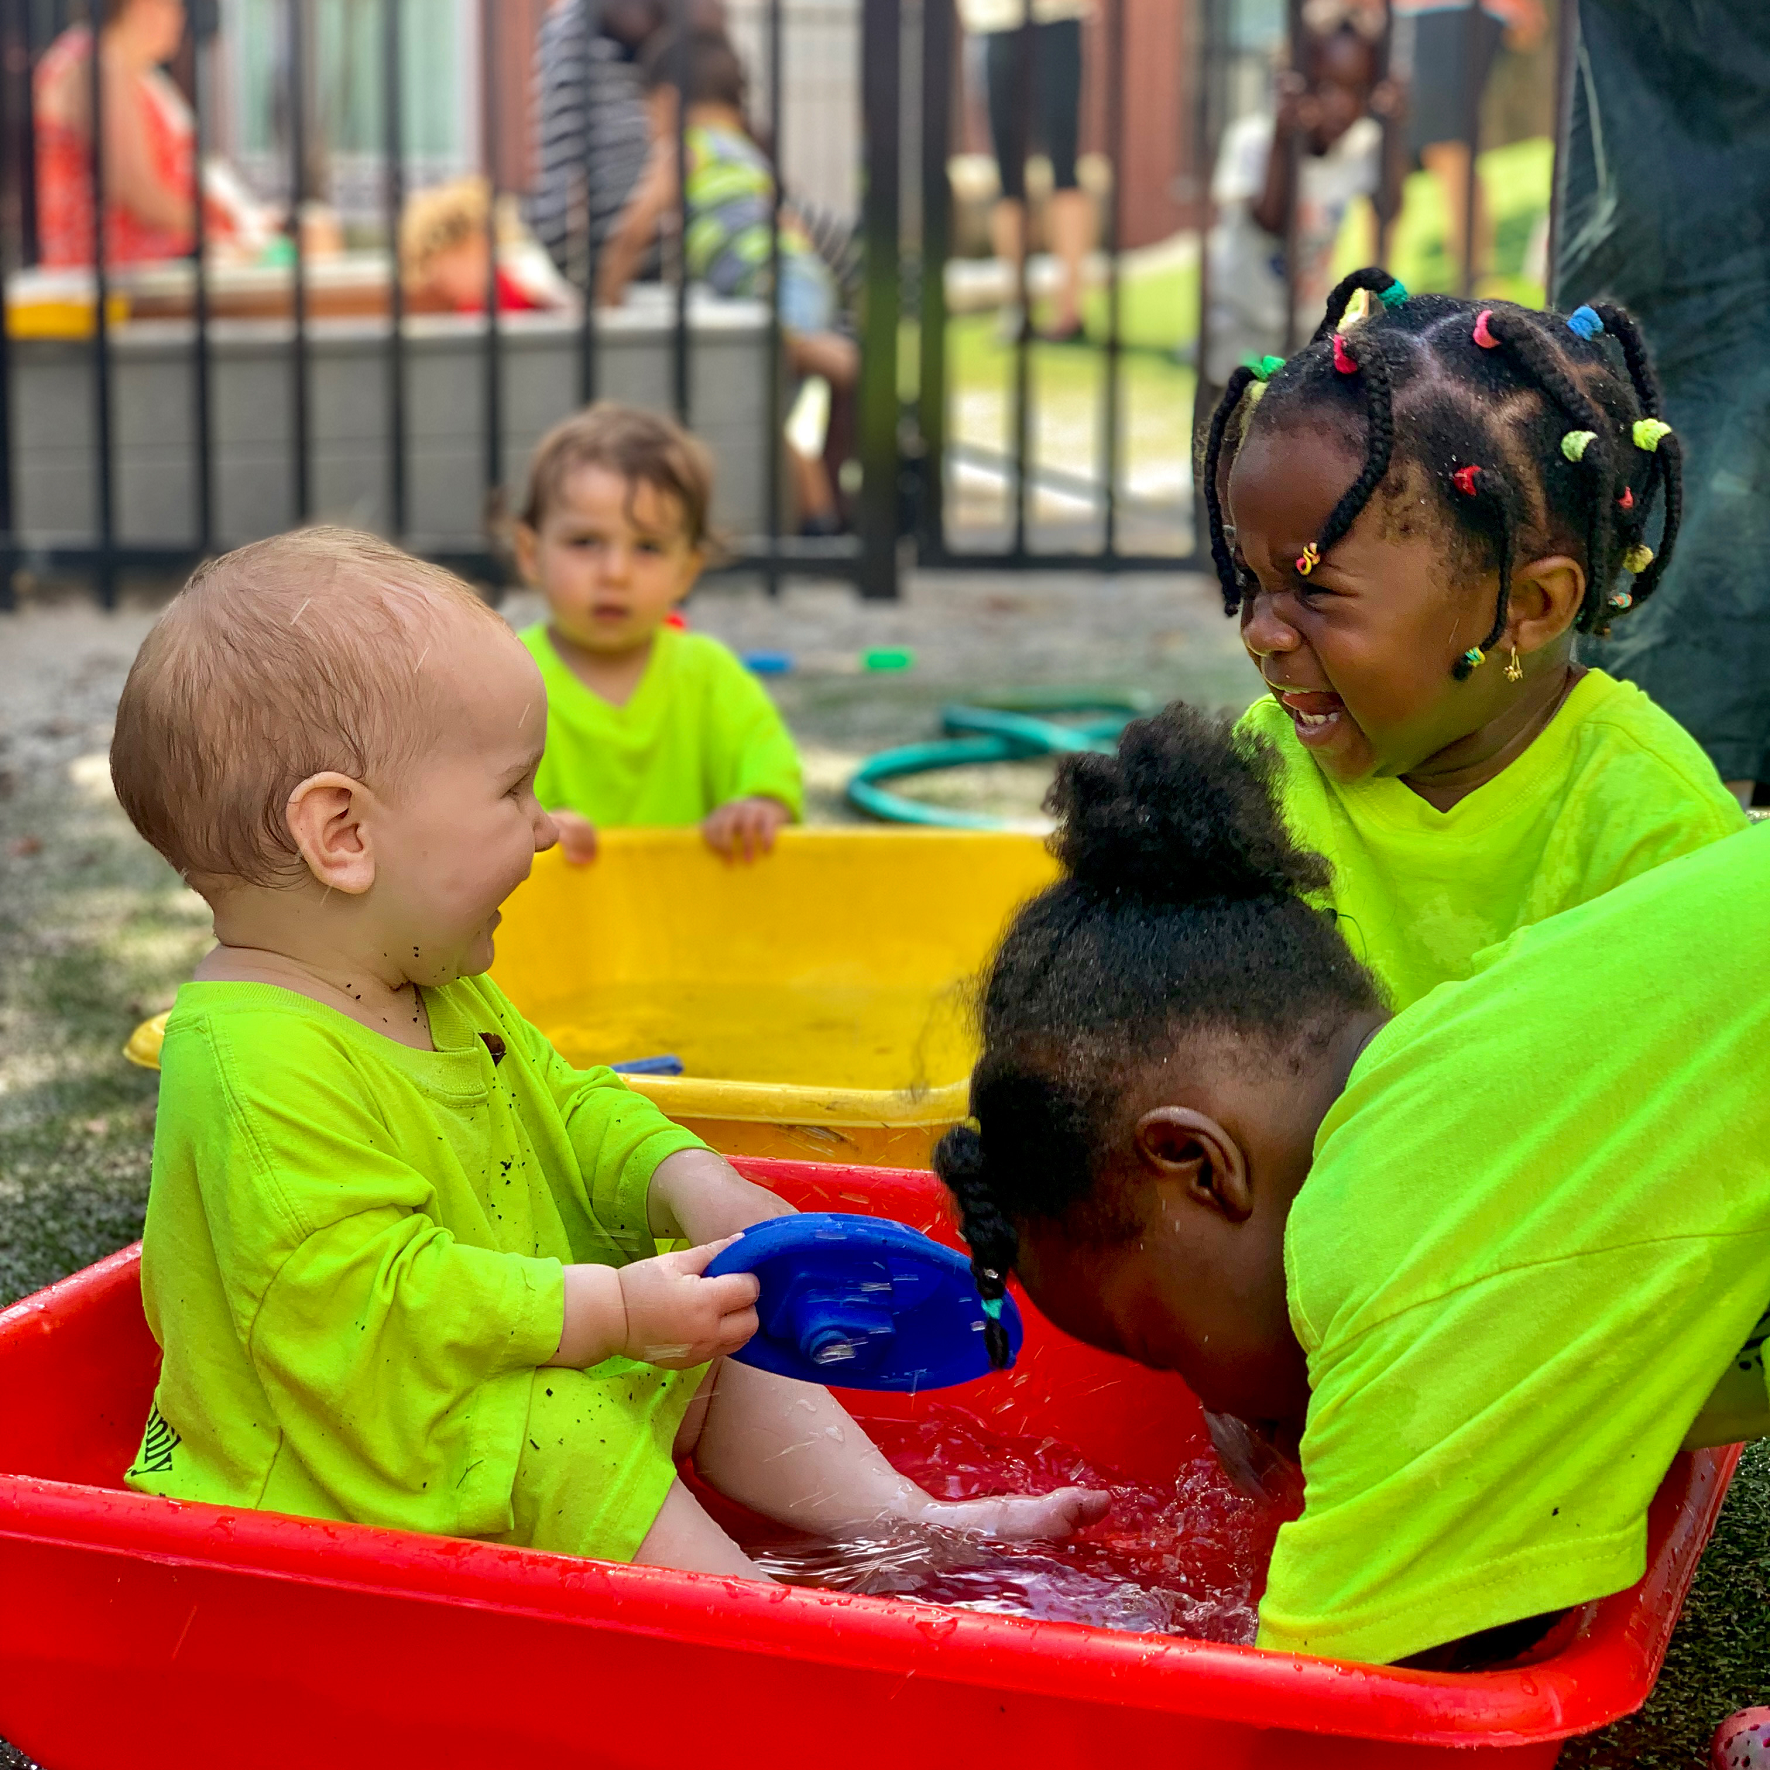 A group of young preschool children laugh with each other as they play in baby pools at Youth and Family Outreach in Portland, Maine.